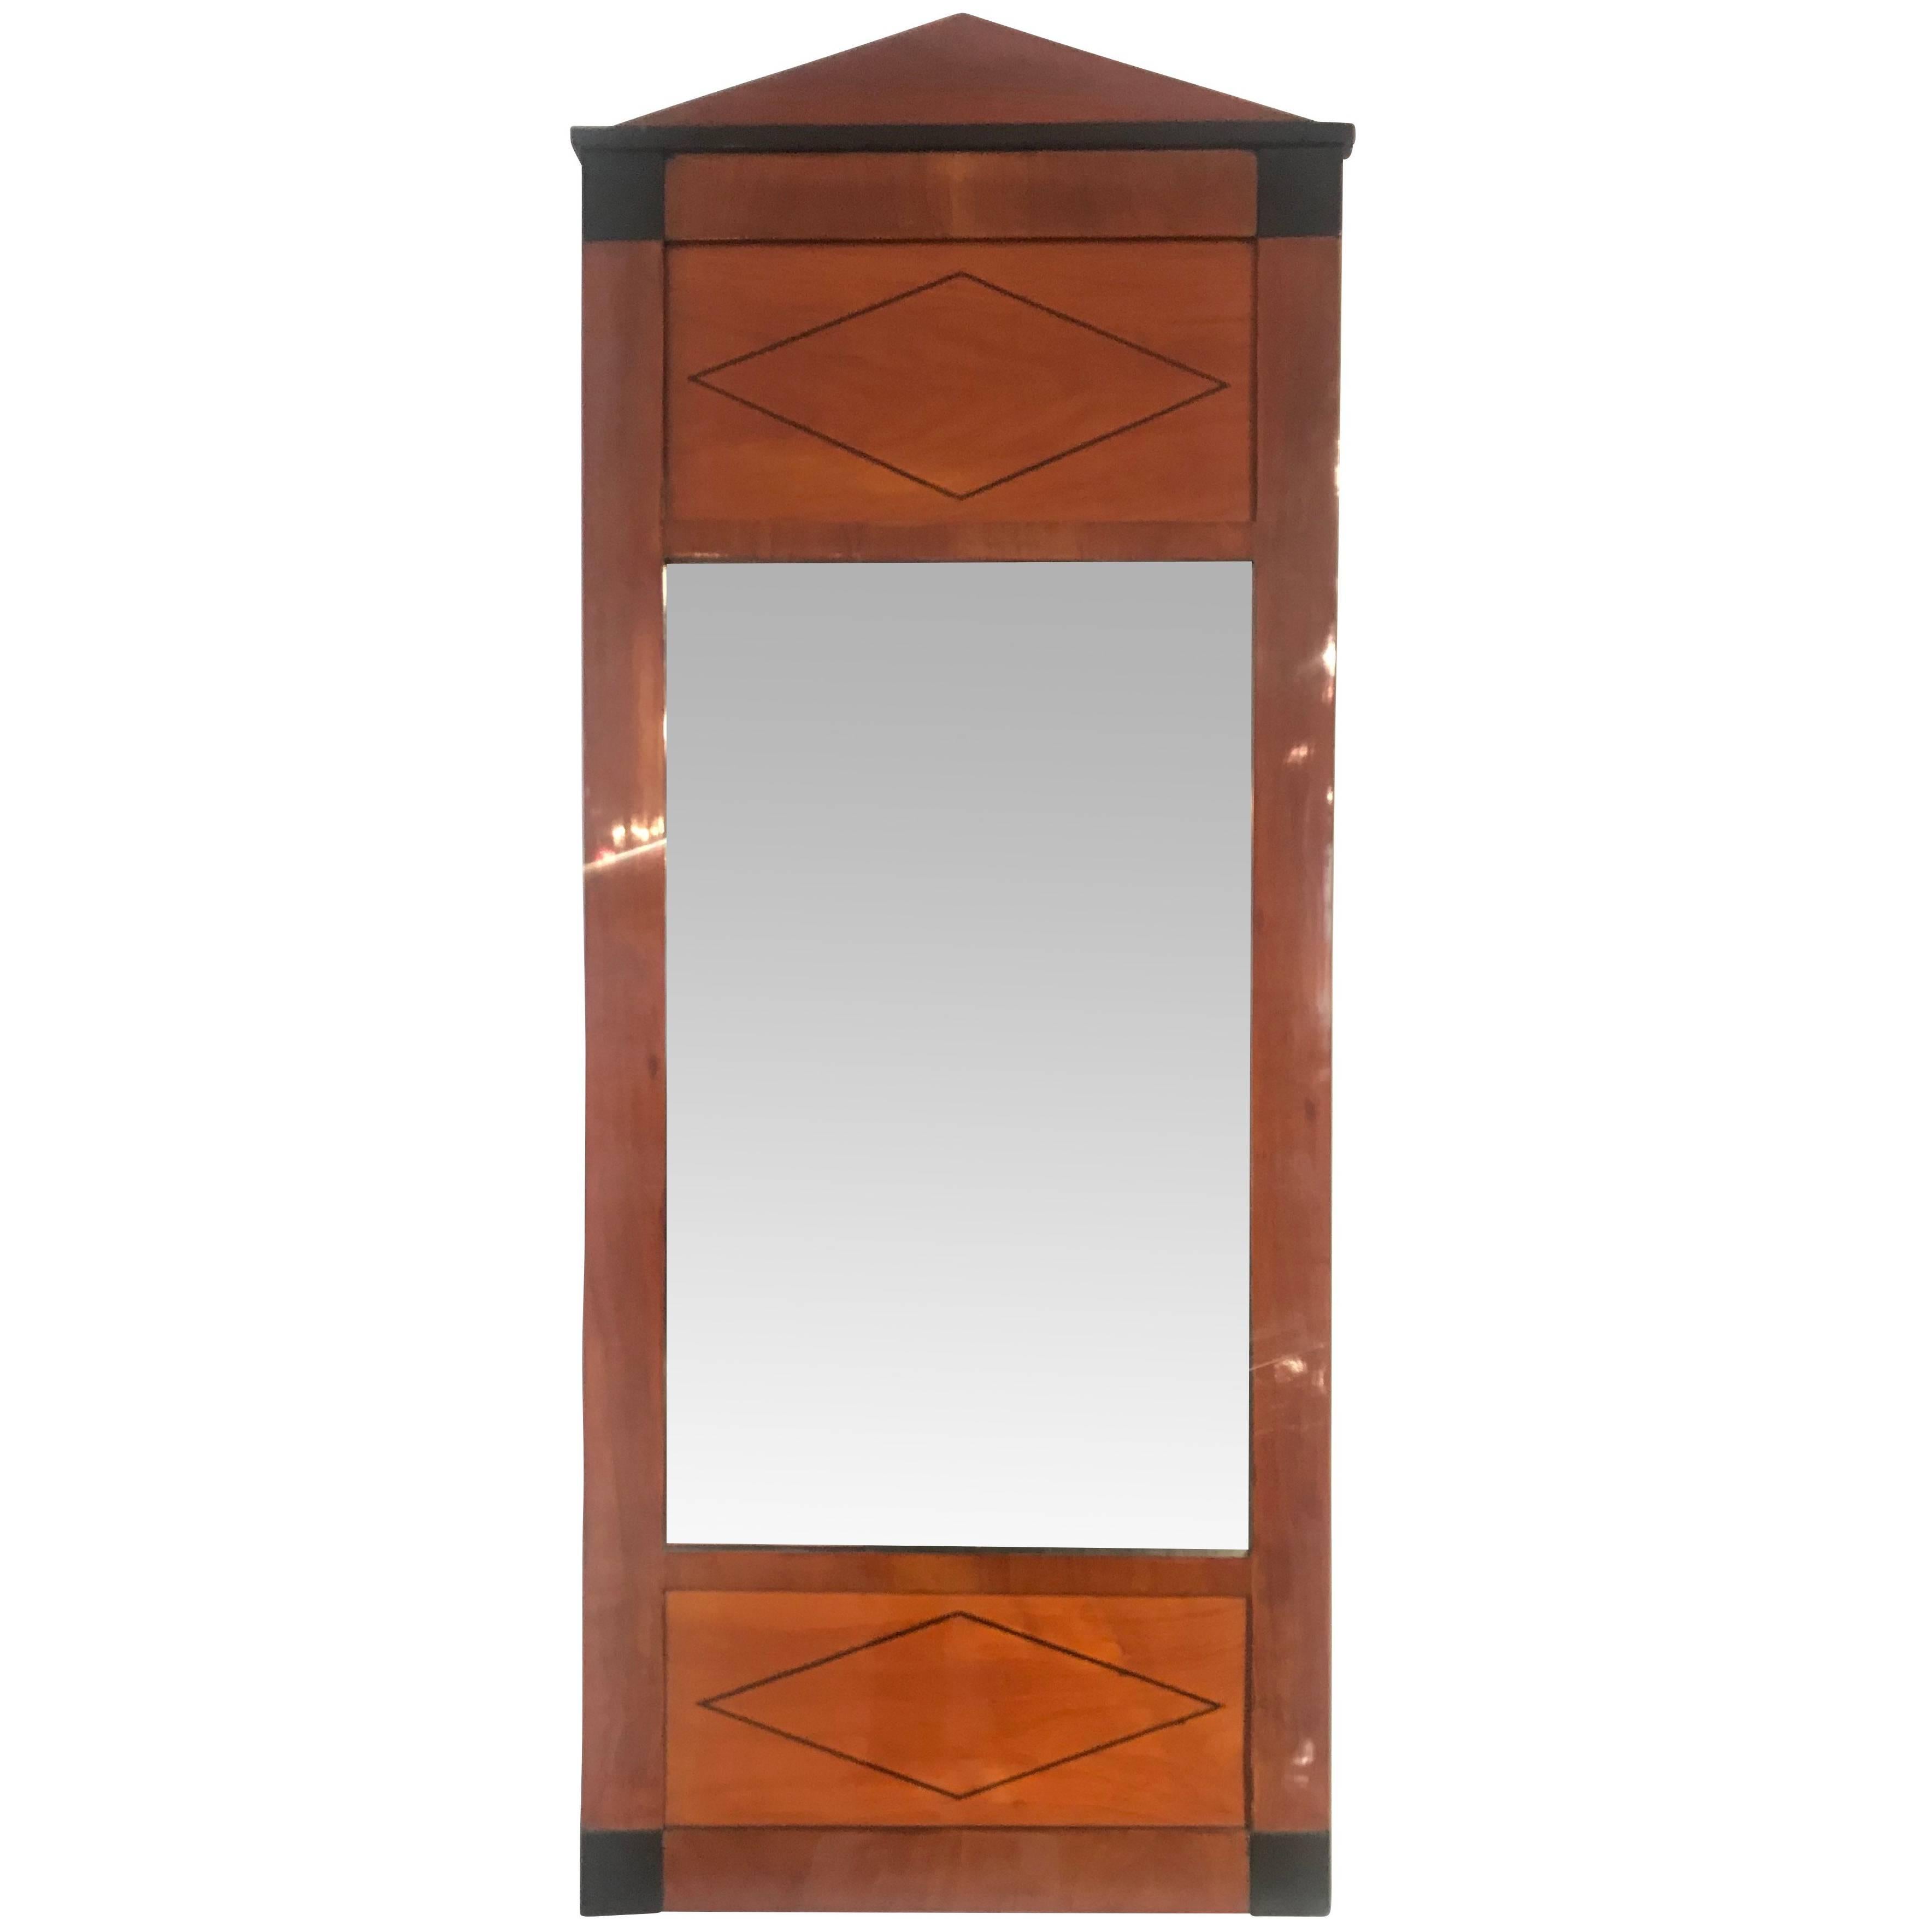 Very elegant classicist Biedermeier mirror in cherry veneer with ebonized parts. 

The hash at the top is made with an ebony inlay. 

The mirror glass is original. 